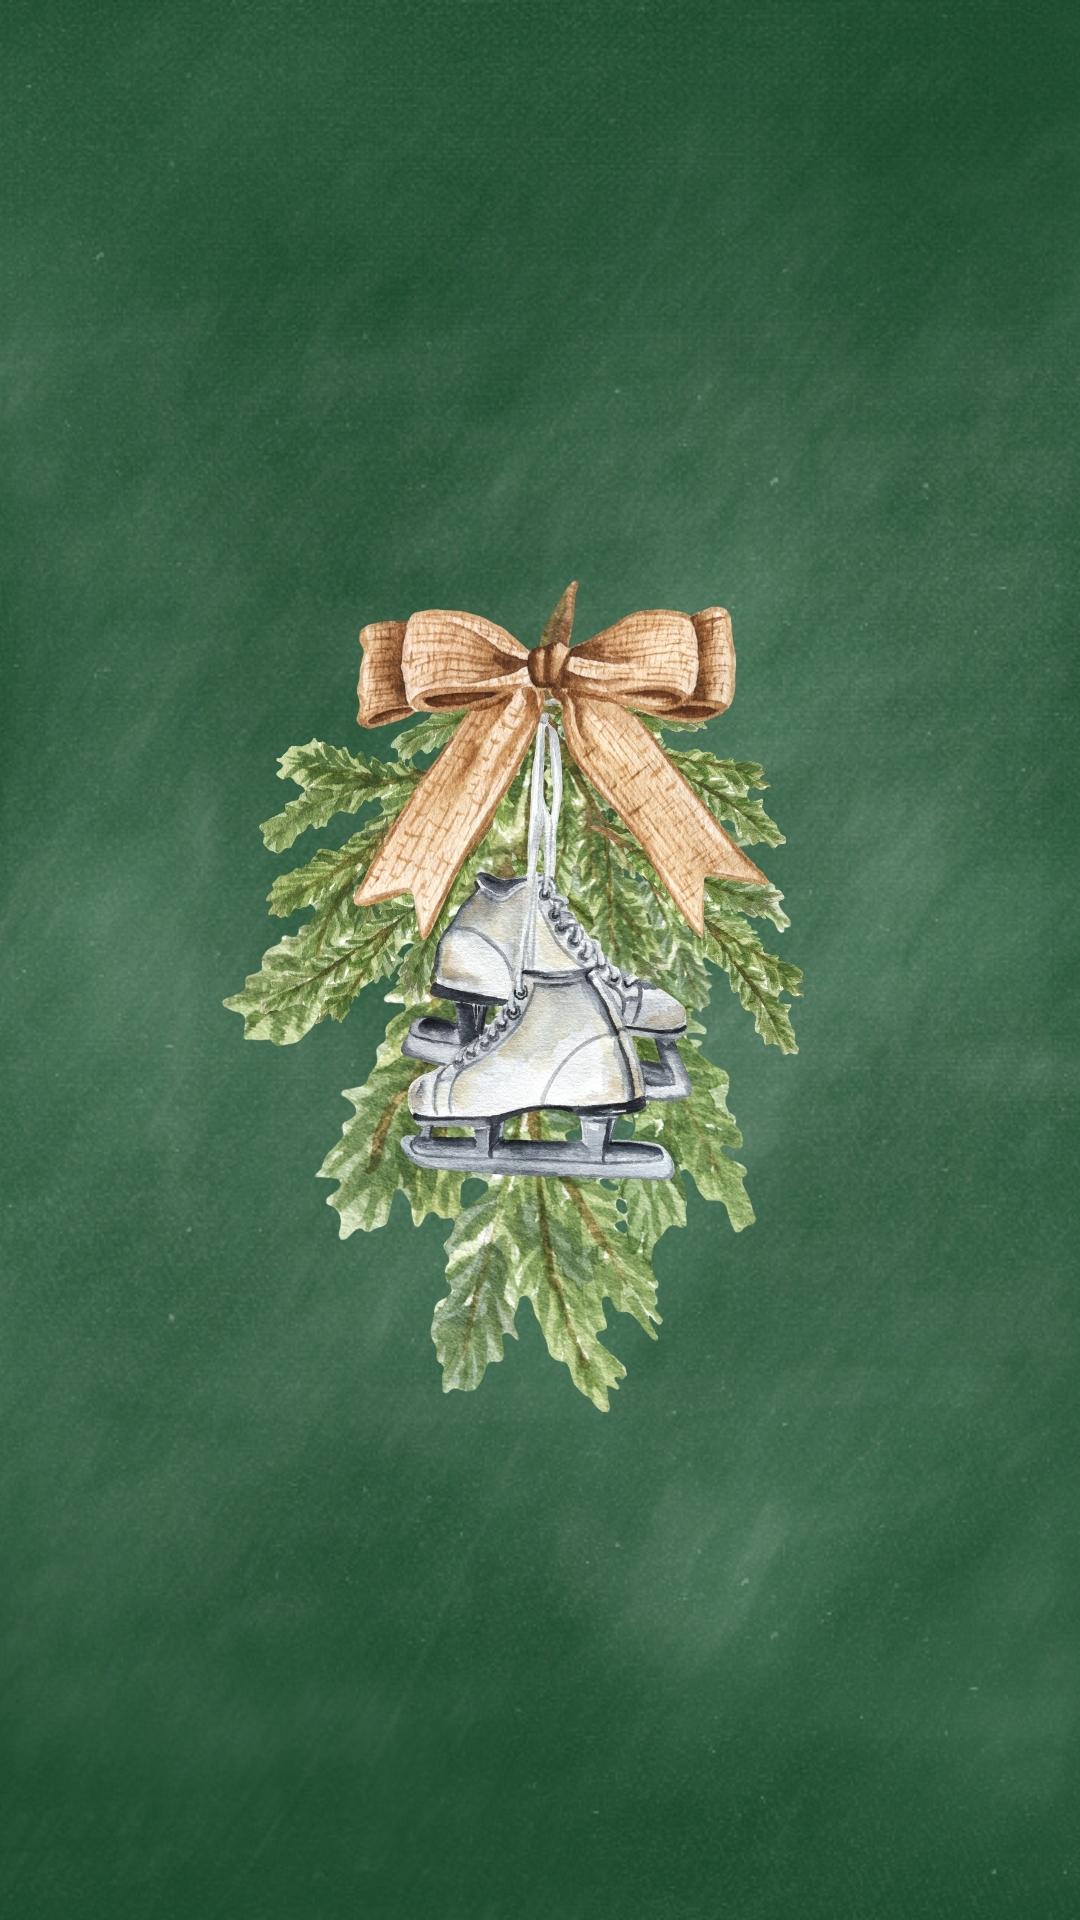 Holiday phone wallpaper showing pine bows and ice skates on a green chalkboard background.